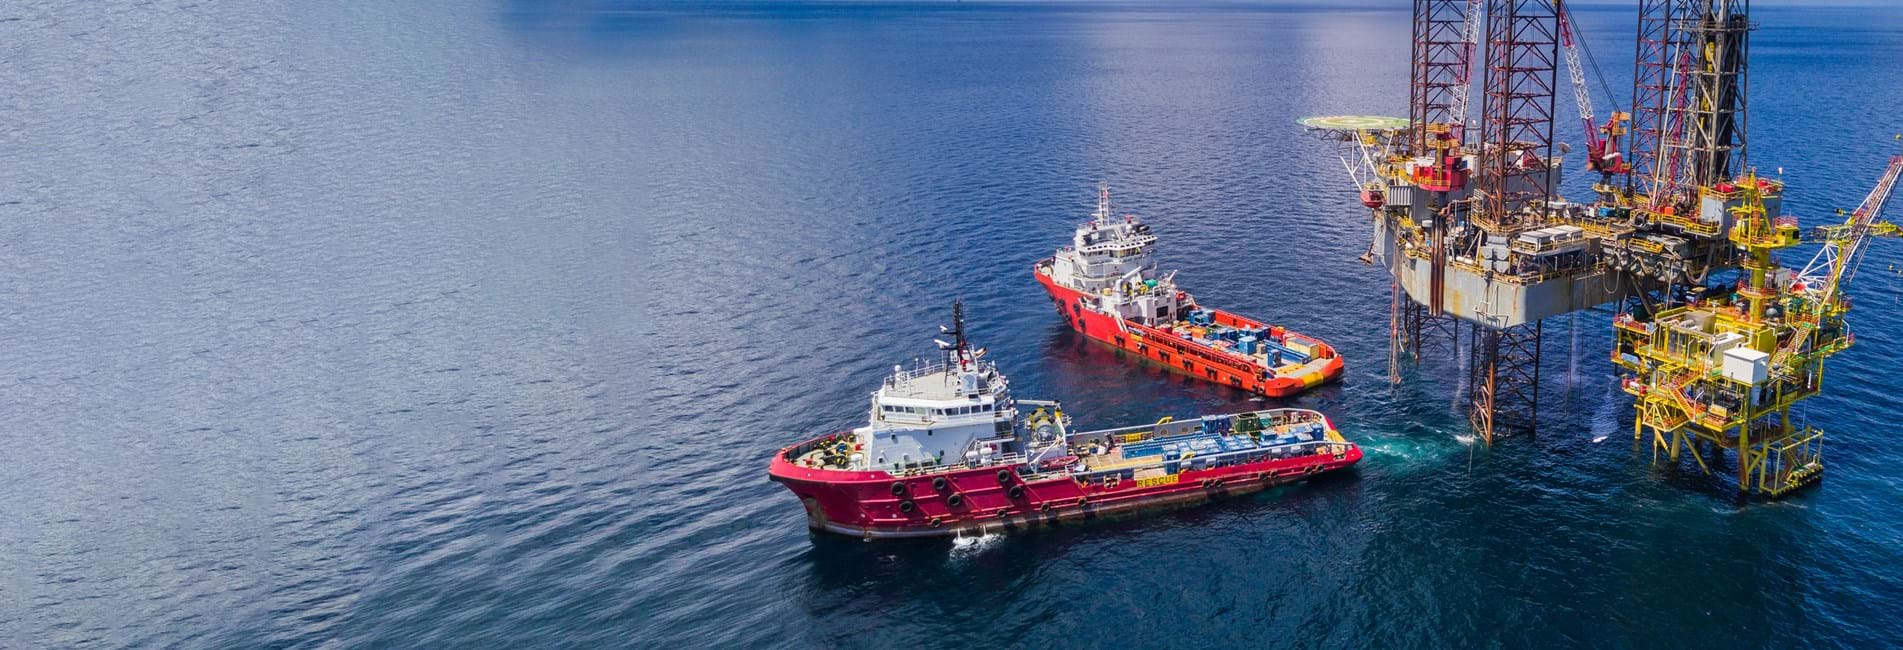 Deepwell cargo and fuel pumps for the marine, oil &amp; gas industry - Svanehøj